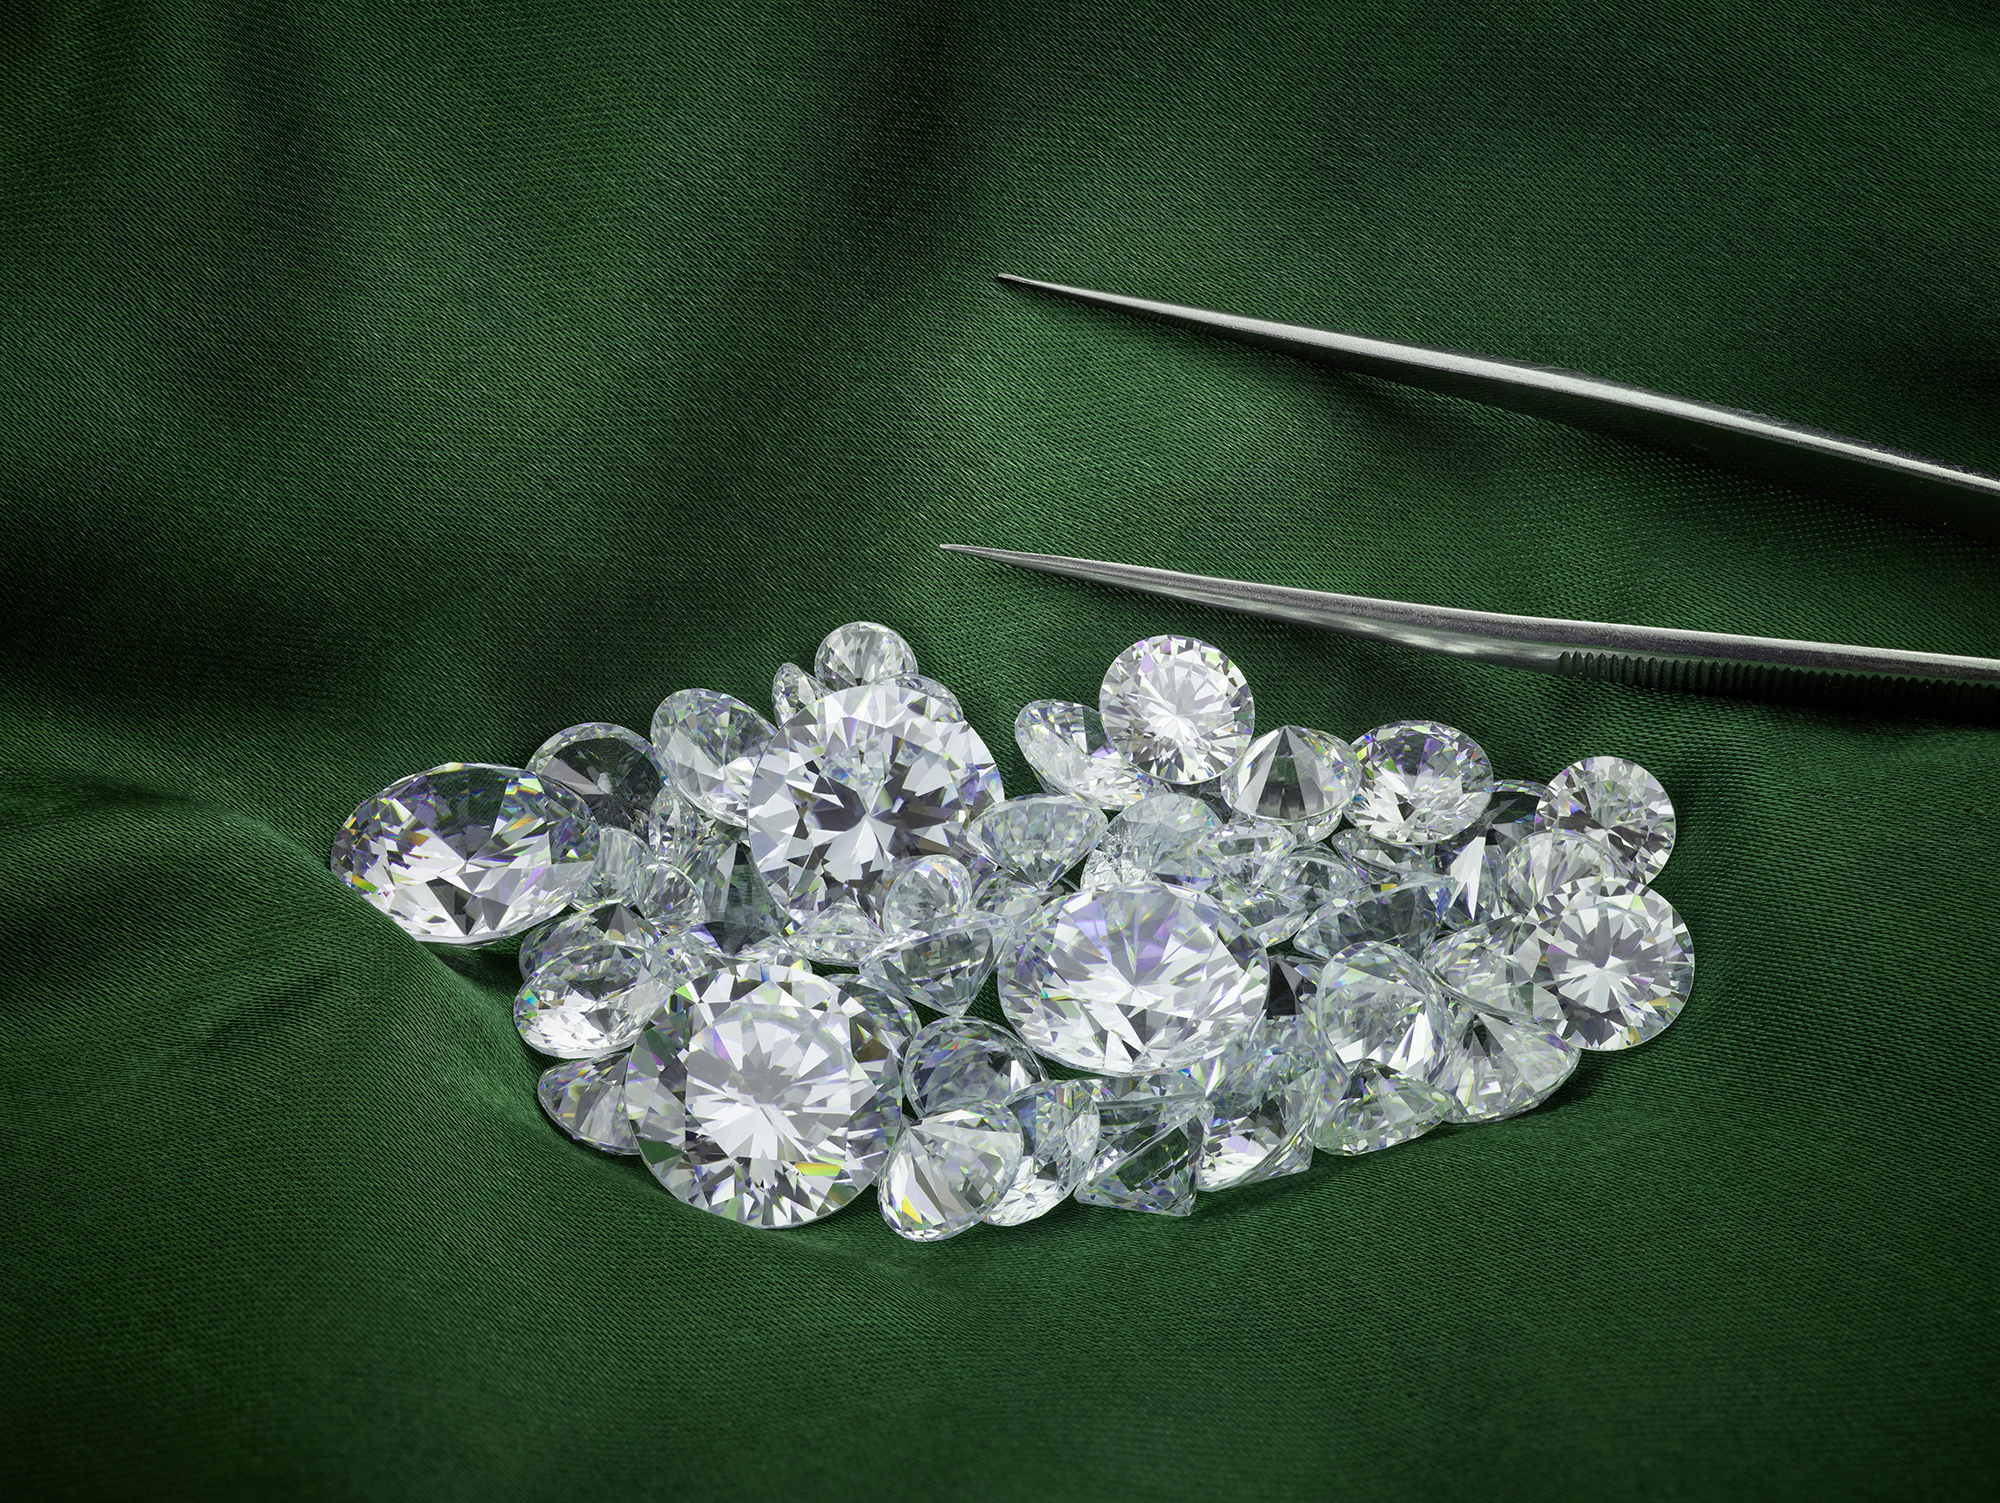 Small pile of loose cut diamonds sit next to tweezers on a green background.